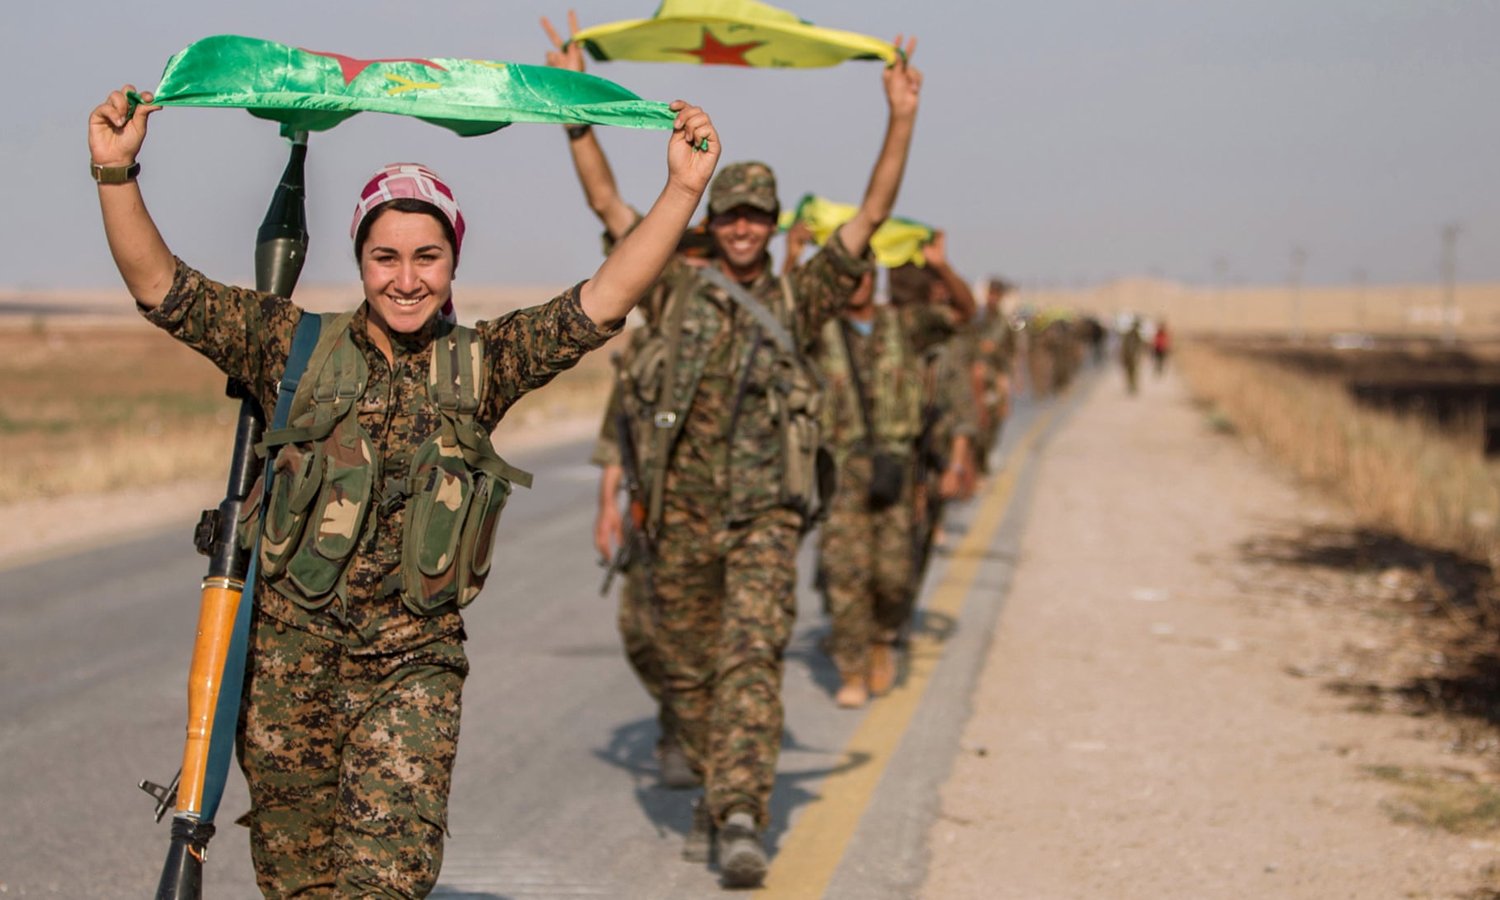 Kurdish fighters waving YPG flags while making victory signs - 2017 (Reuters)